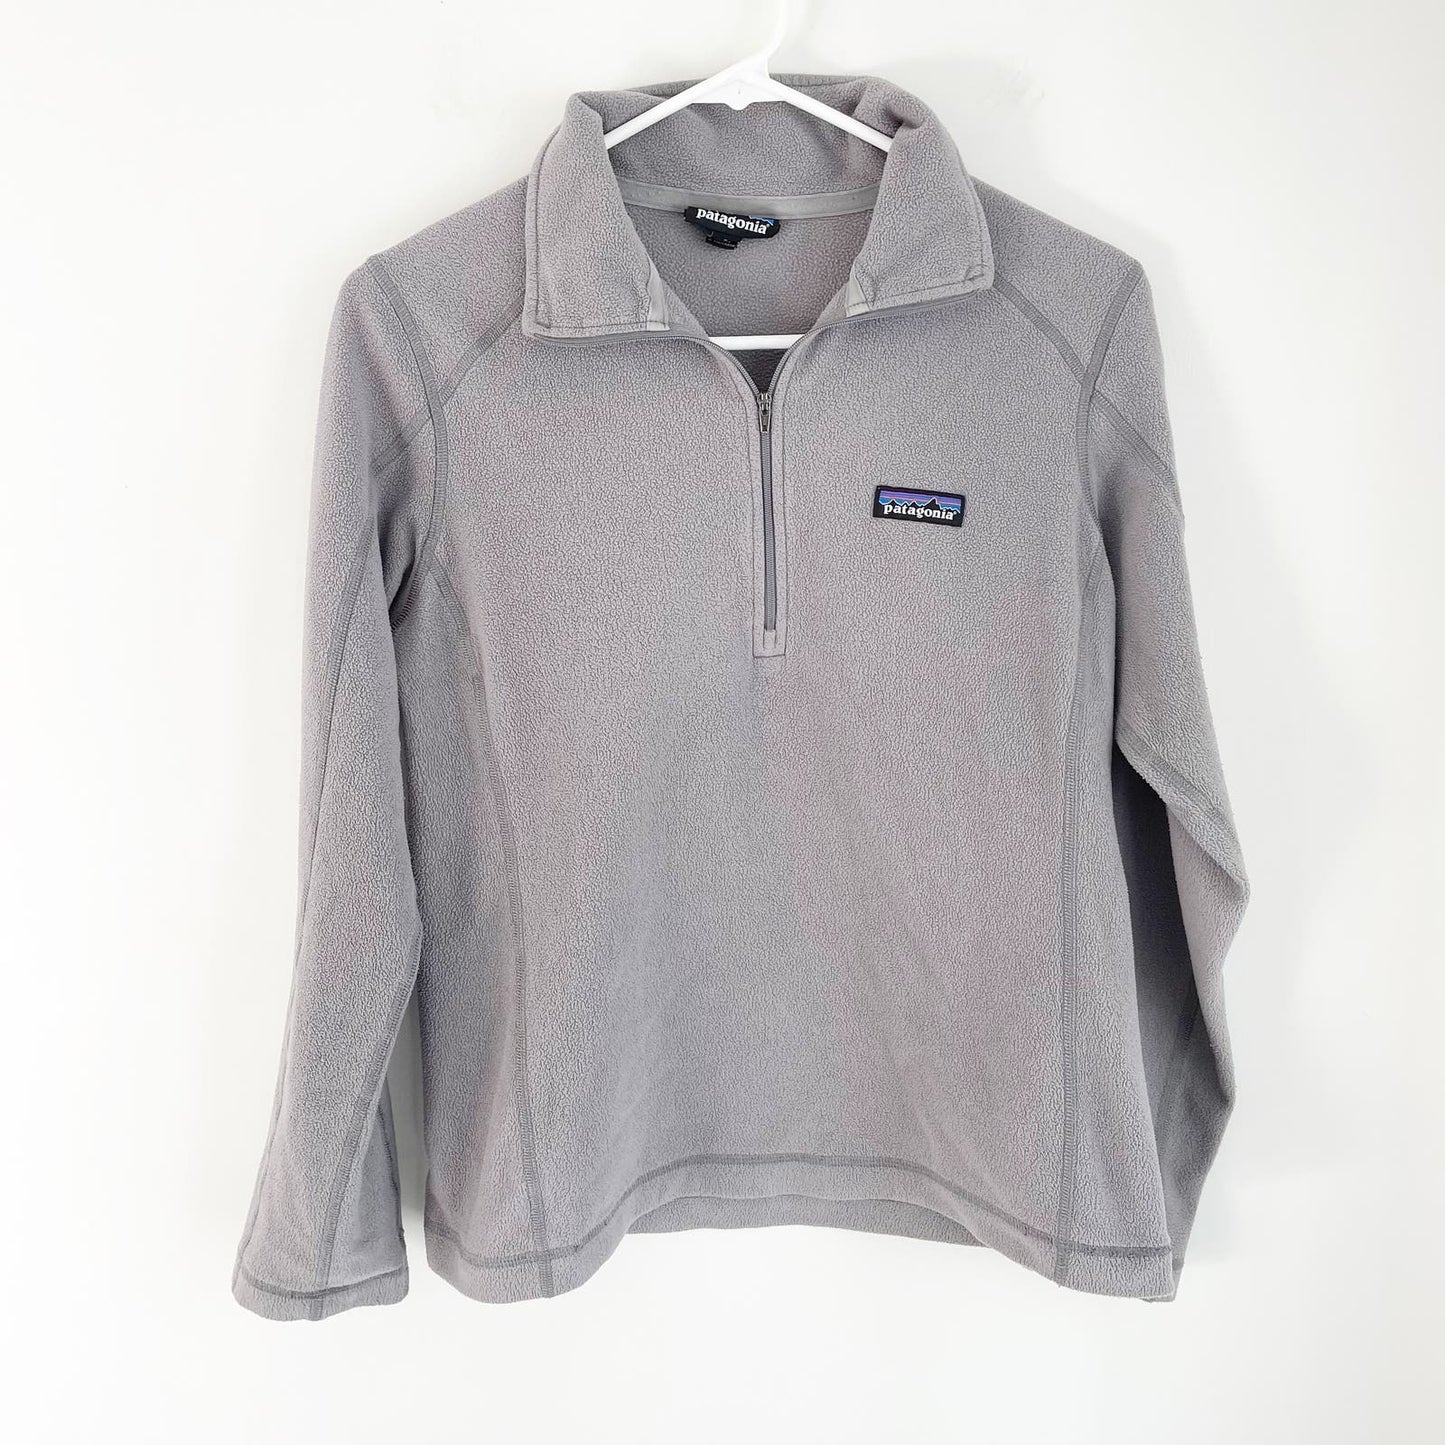 Patagonia Micro D 1/4 Zip Fleece Pullover Jacket Feather Gray Small